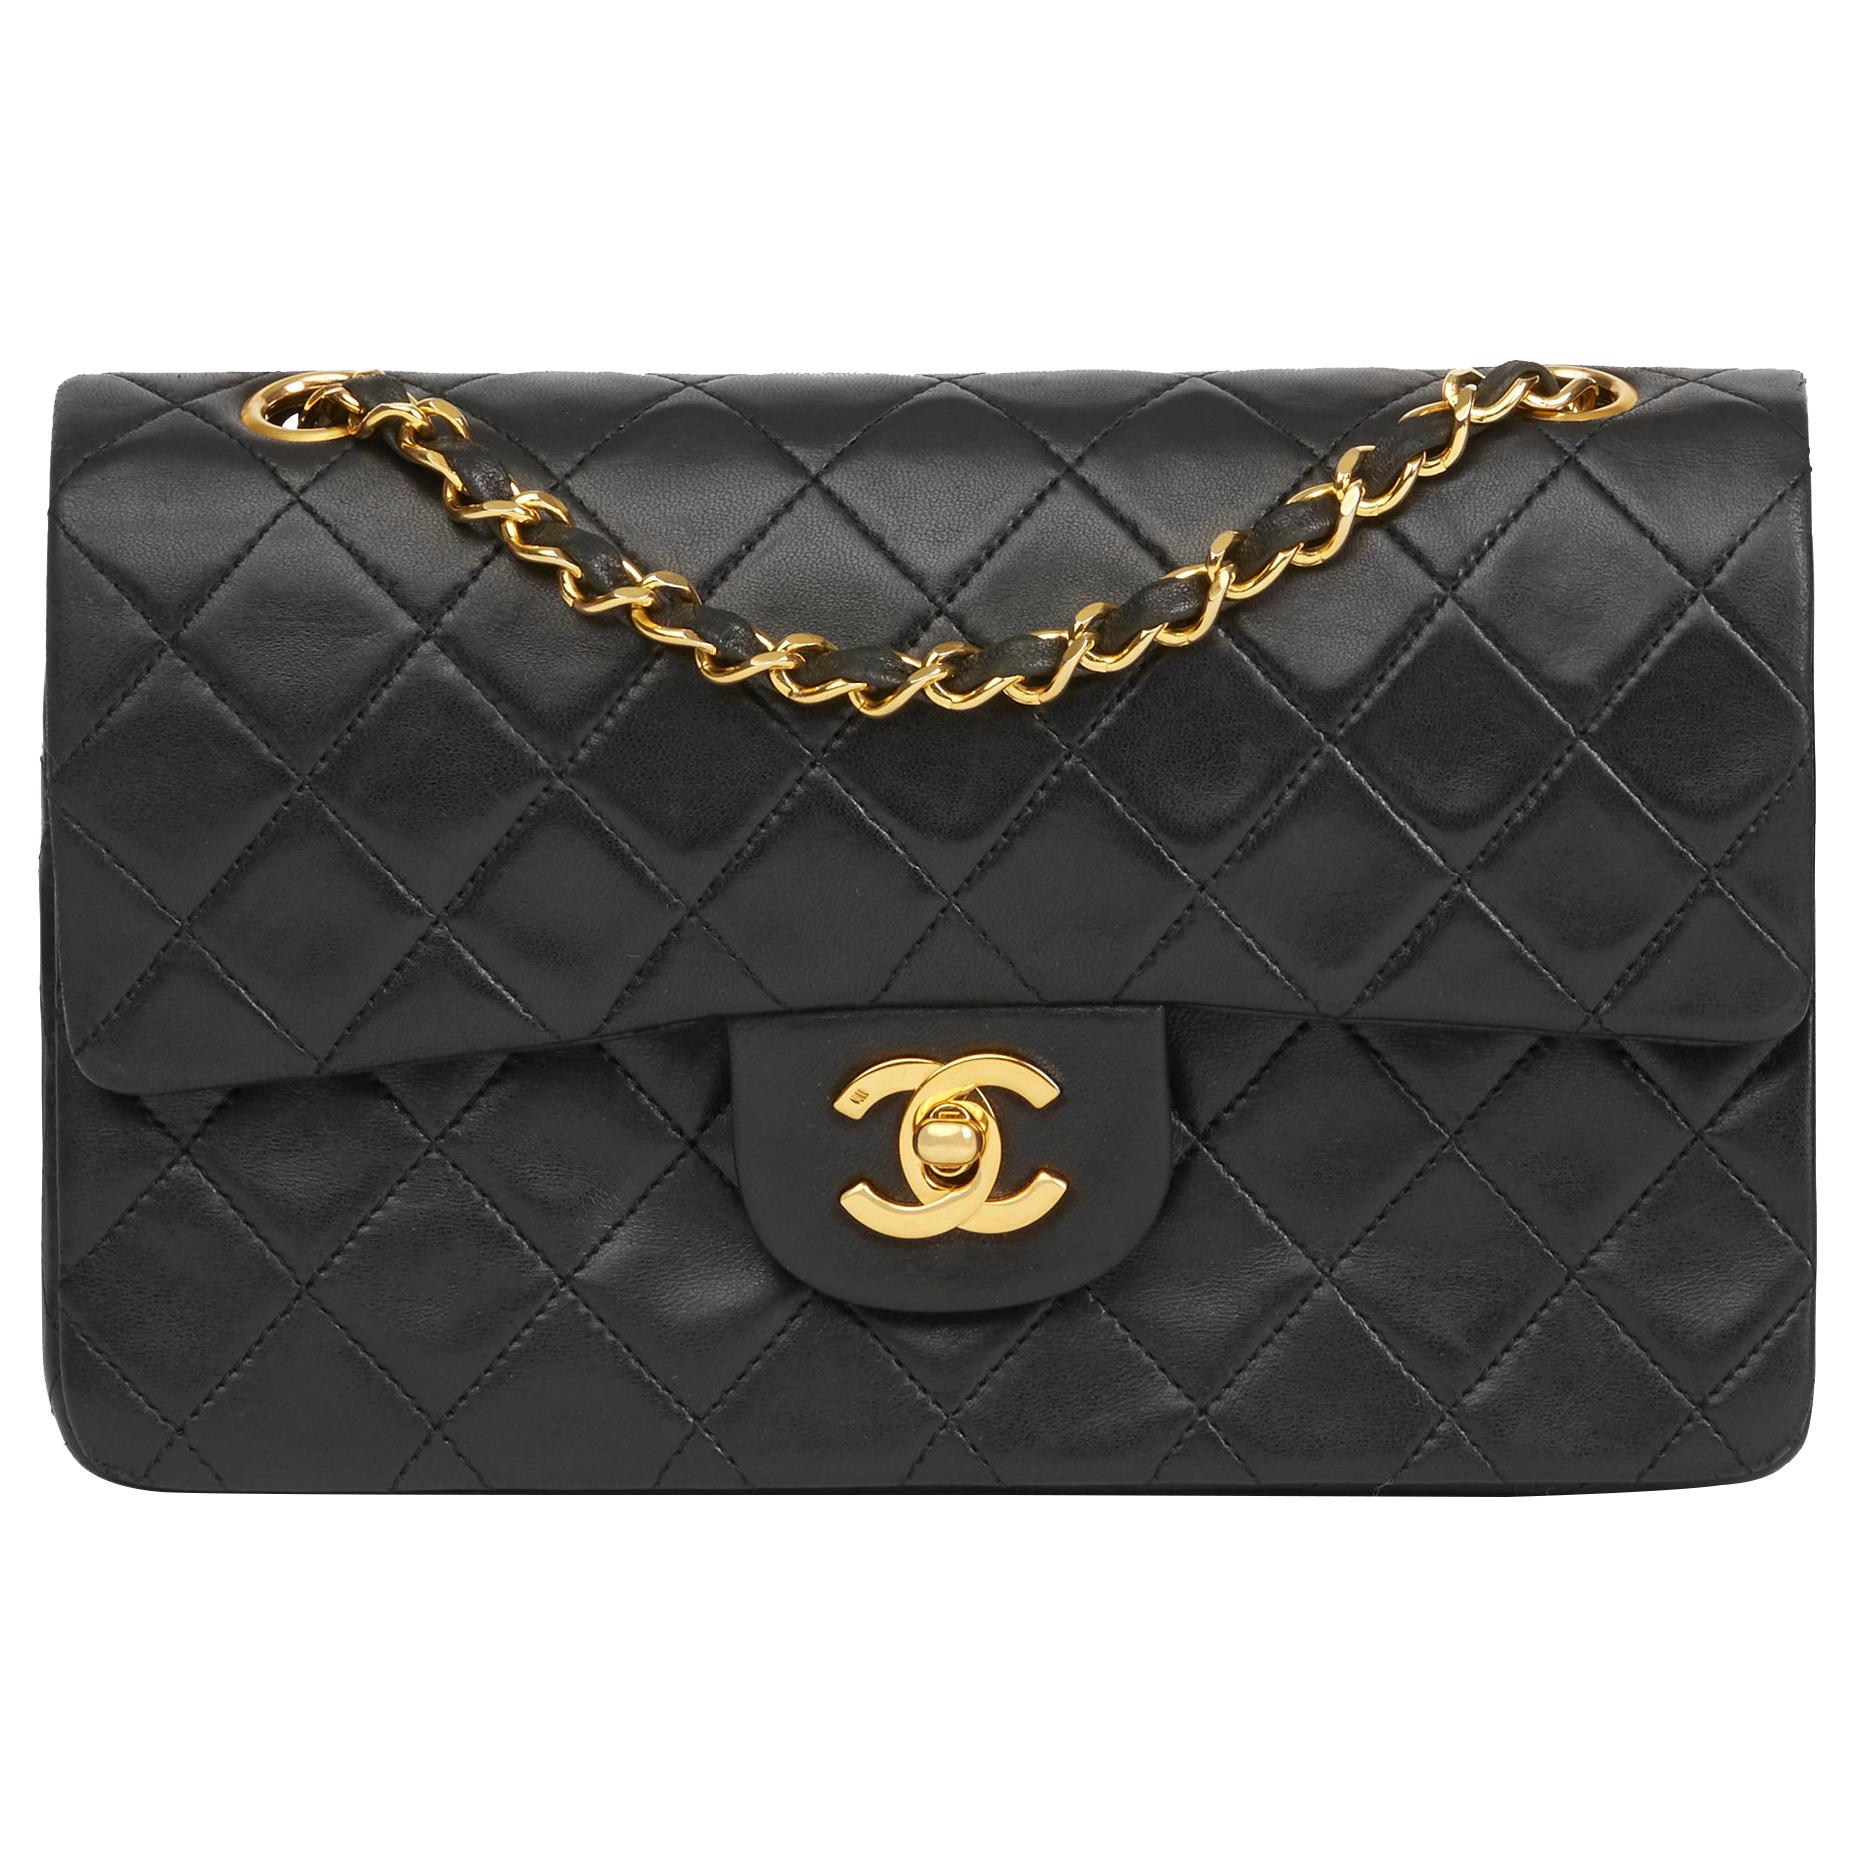 1980 Chanel Black Quilted Lambskin Vintage Medium Classic Double Flap Bag